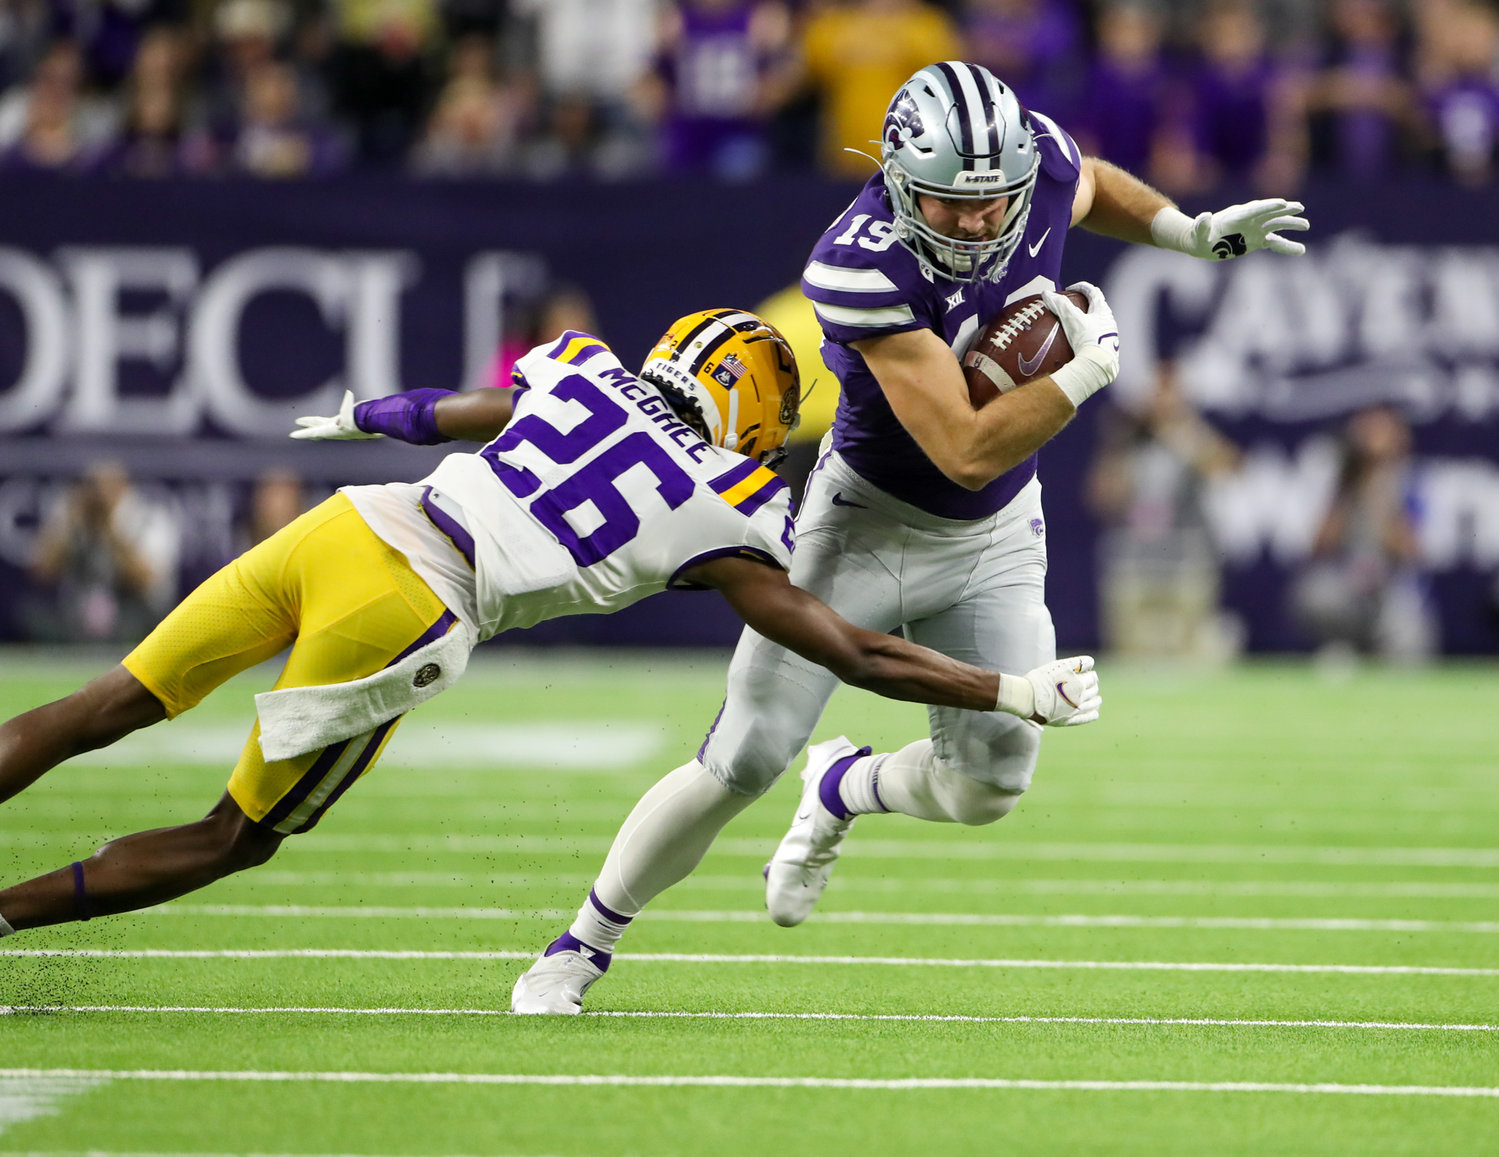 Kansas State Wildcats tight end Sammy Wheeler (19) works against LSU Tigers defensive back Damarius McGhee (26) on a carry during the TaxAct Texas Bowl on Jan. 4, 2022 in Houston, Texas.